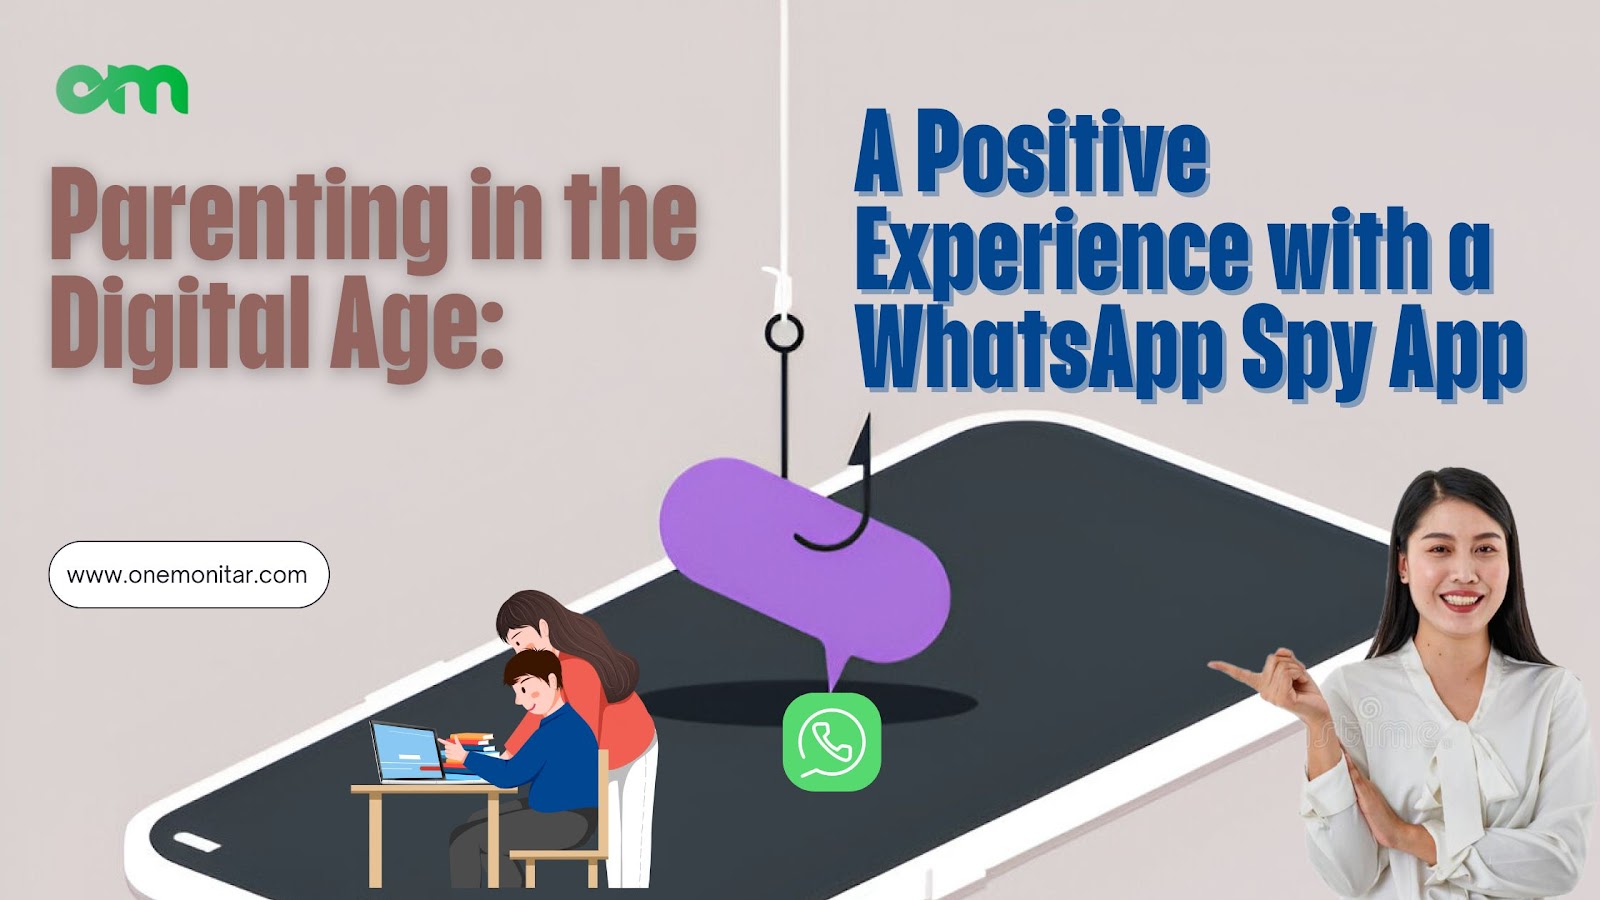 Parenting in the Digital Age: A Positive Experience with a WhatsApp Spy App